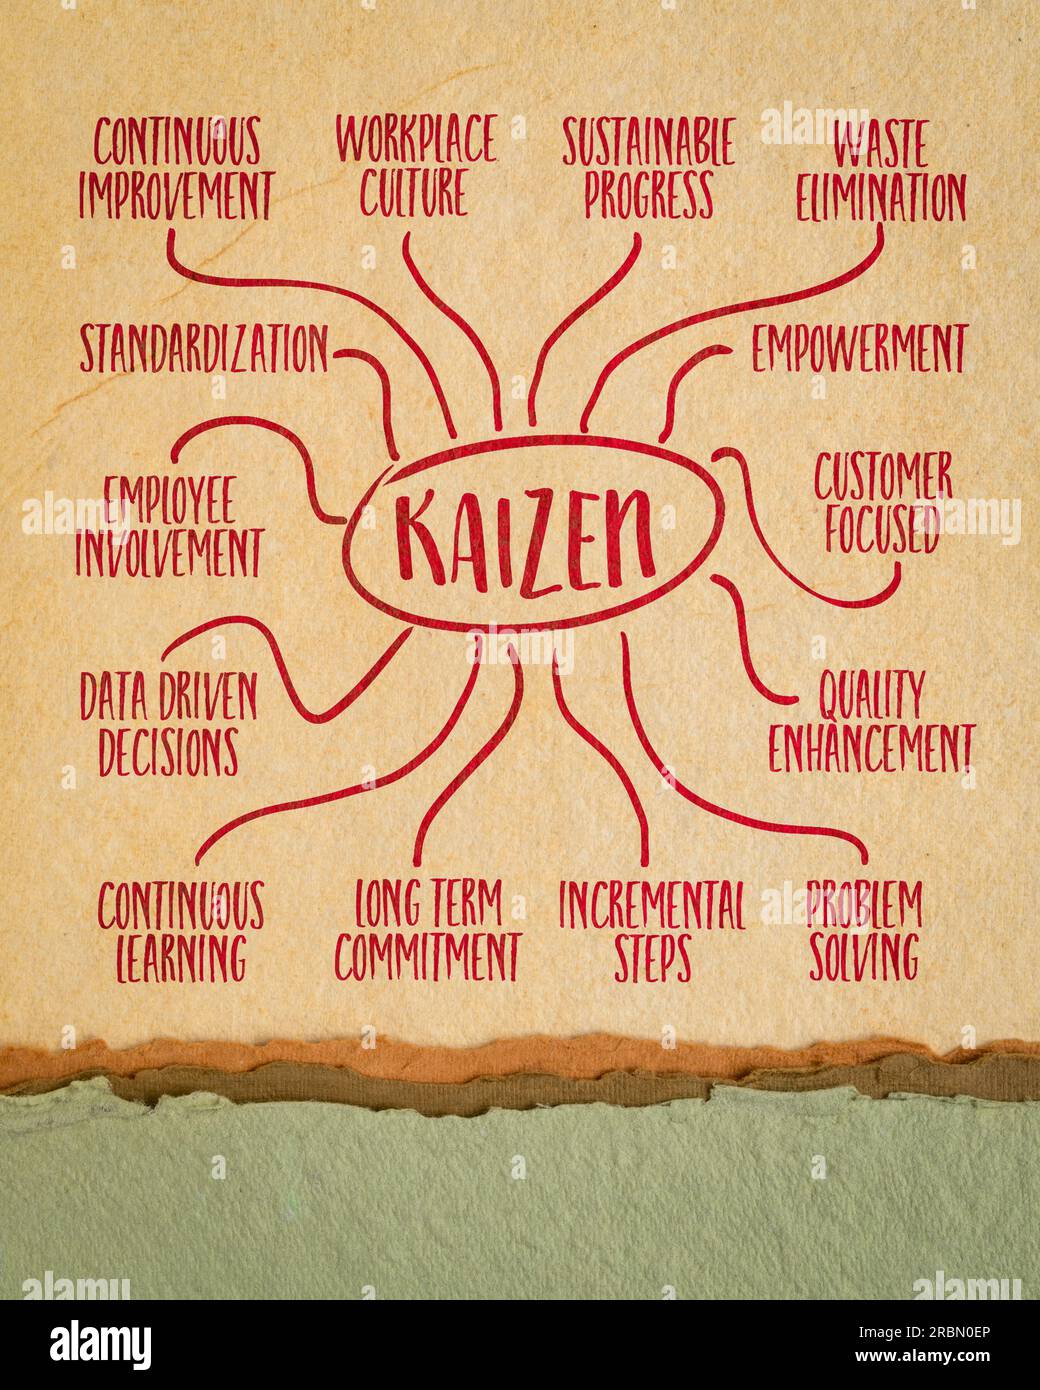 Kaizen - Japanese continuous improvement concept - infographics or mind map sketch on art paper Stock Photo